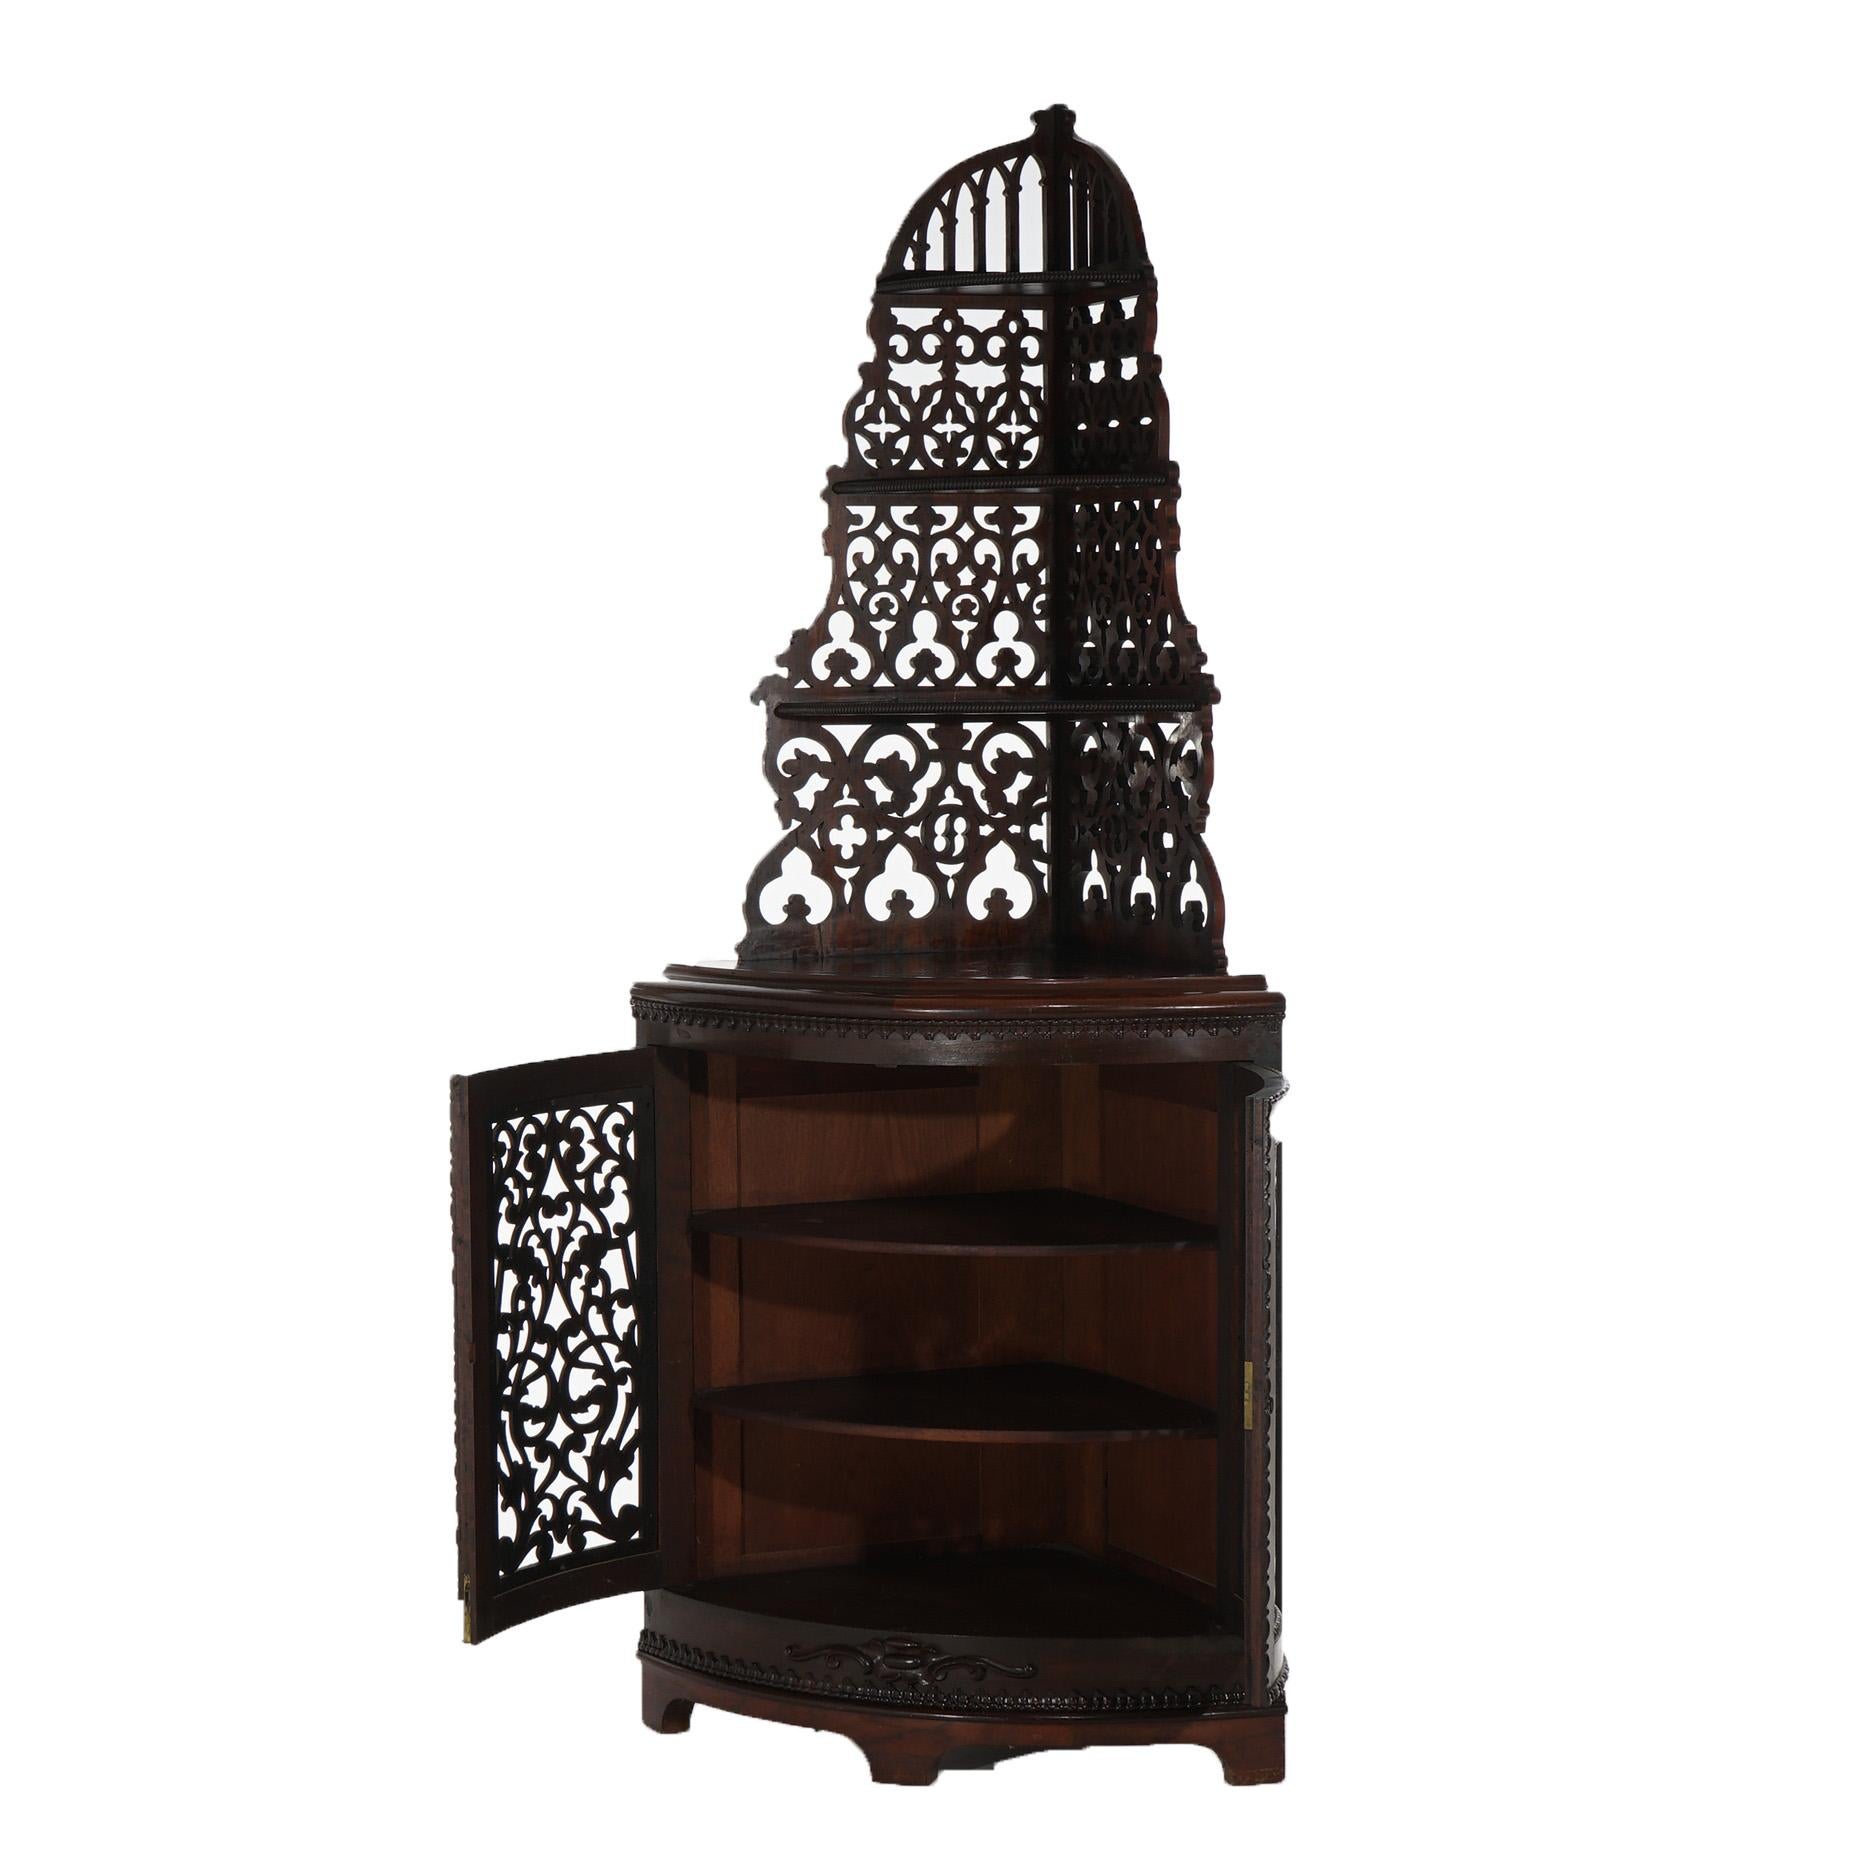 ***Ask About Reduced In-House Delivery Rates - Reliable Professional Service & Fully Insured***

Antique Victorian Rosewood Corner Etagere with Foliate Reticulated Back & Graduated Carved Shelving over Double Door Lower Cabinet, c1870


Measures-